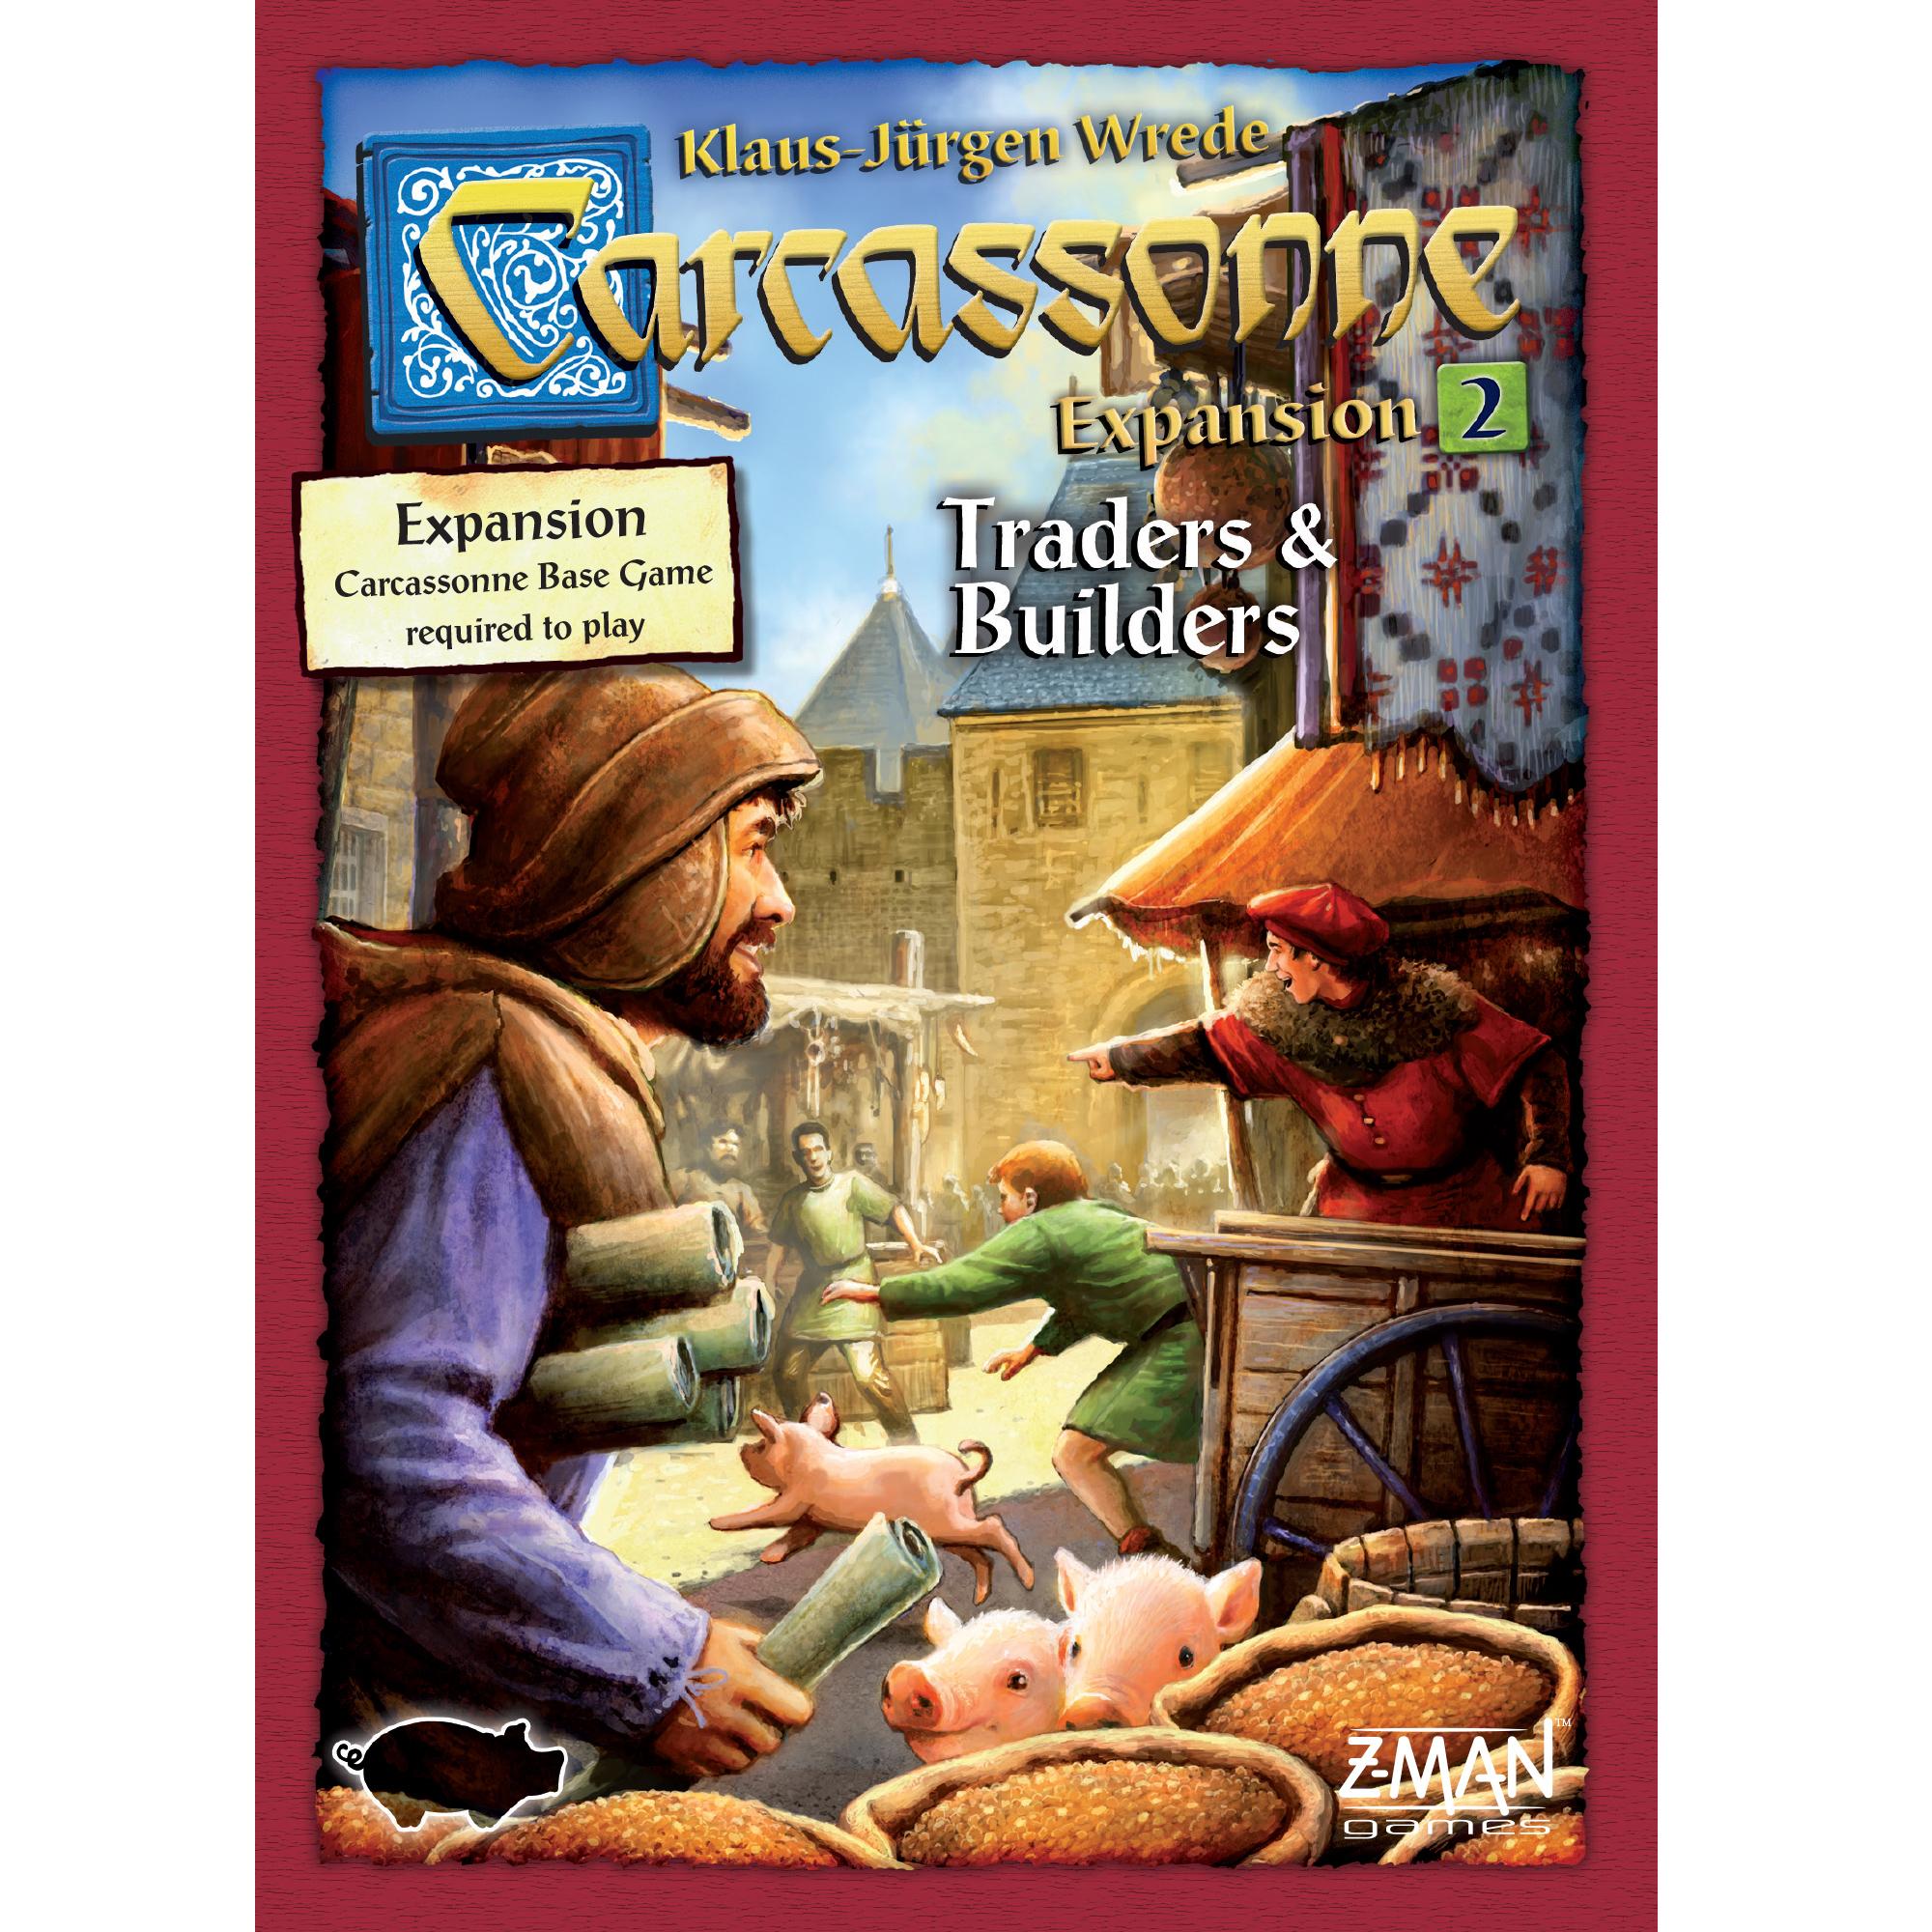 Carcassonne Expansion 2: Traders & Builders Board Game for Ages 7 and Up, from Asmodee - image 1 of 7